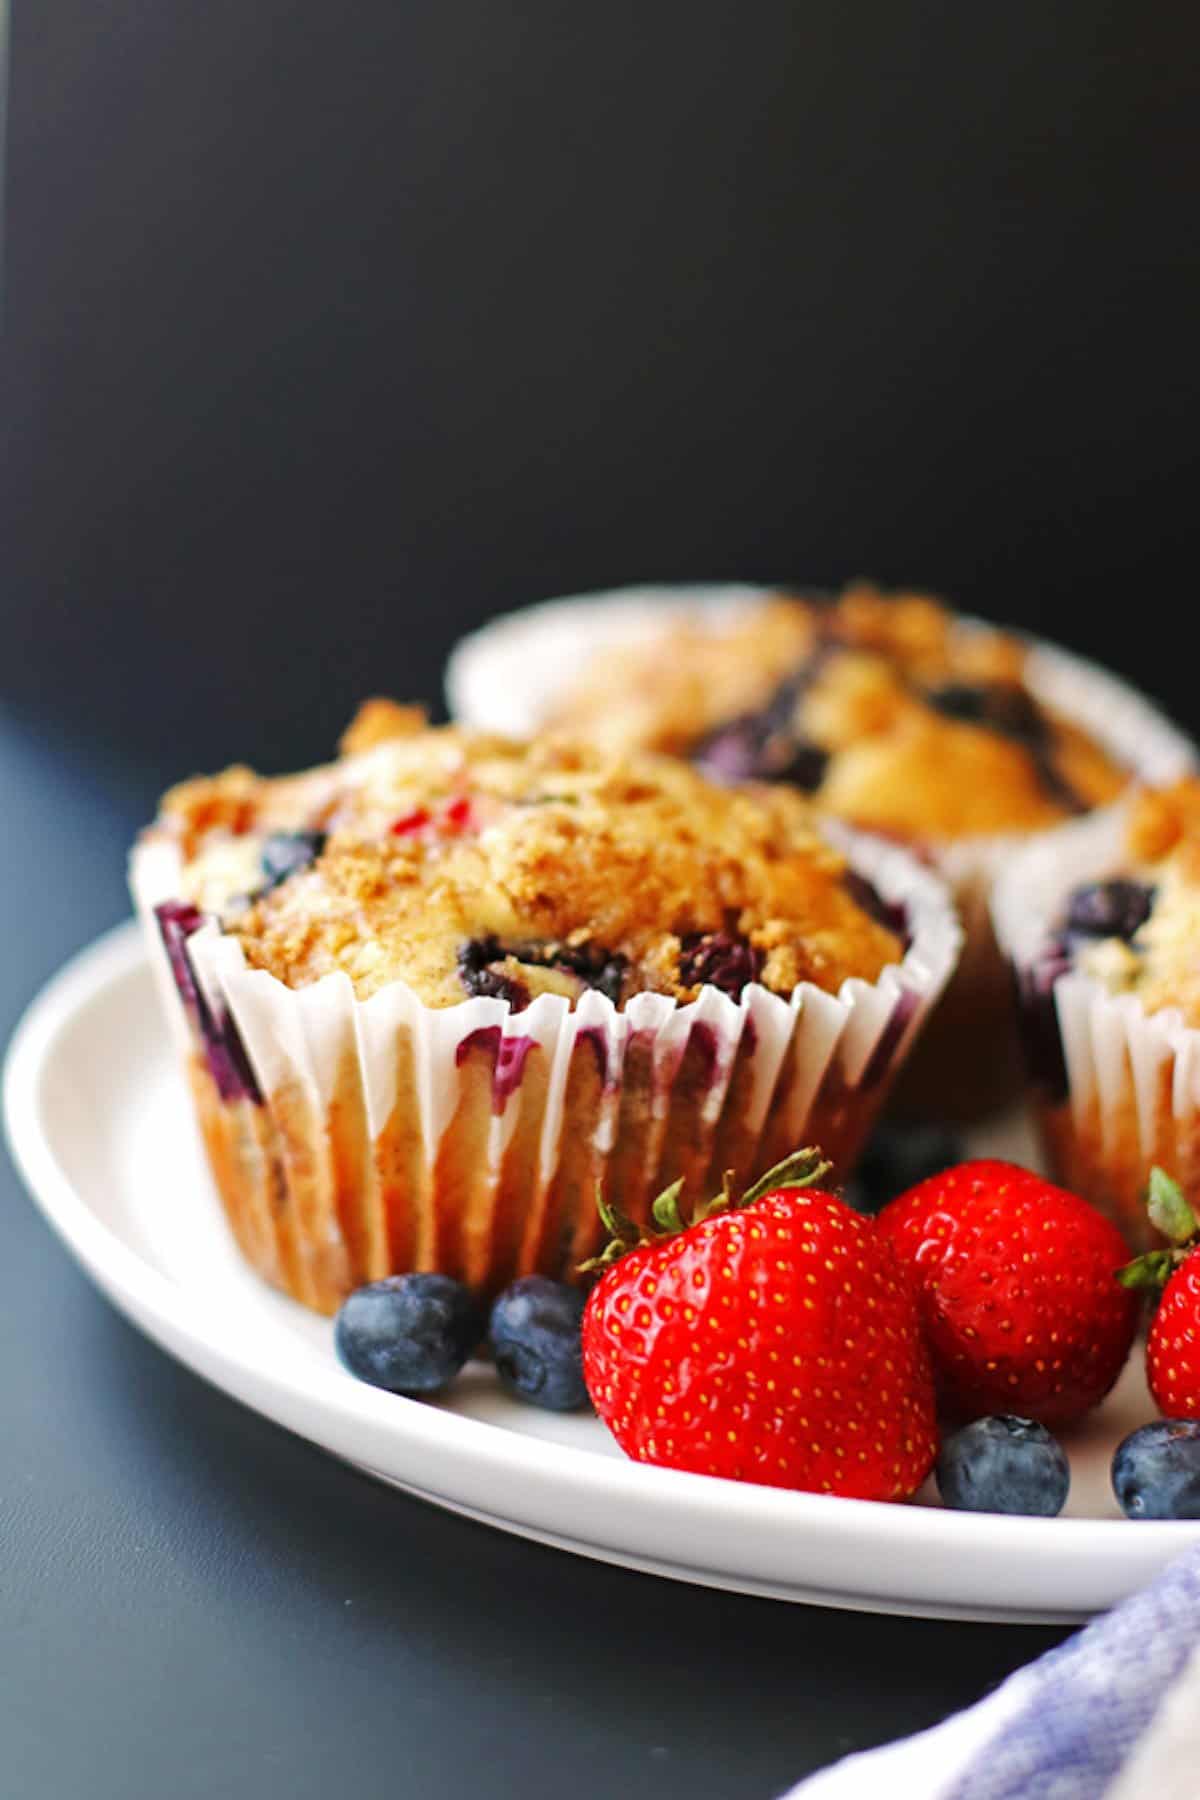 Three mixed berry muffins on a plate with berries.